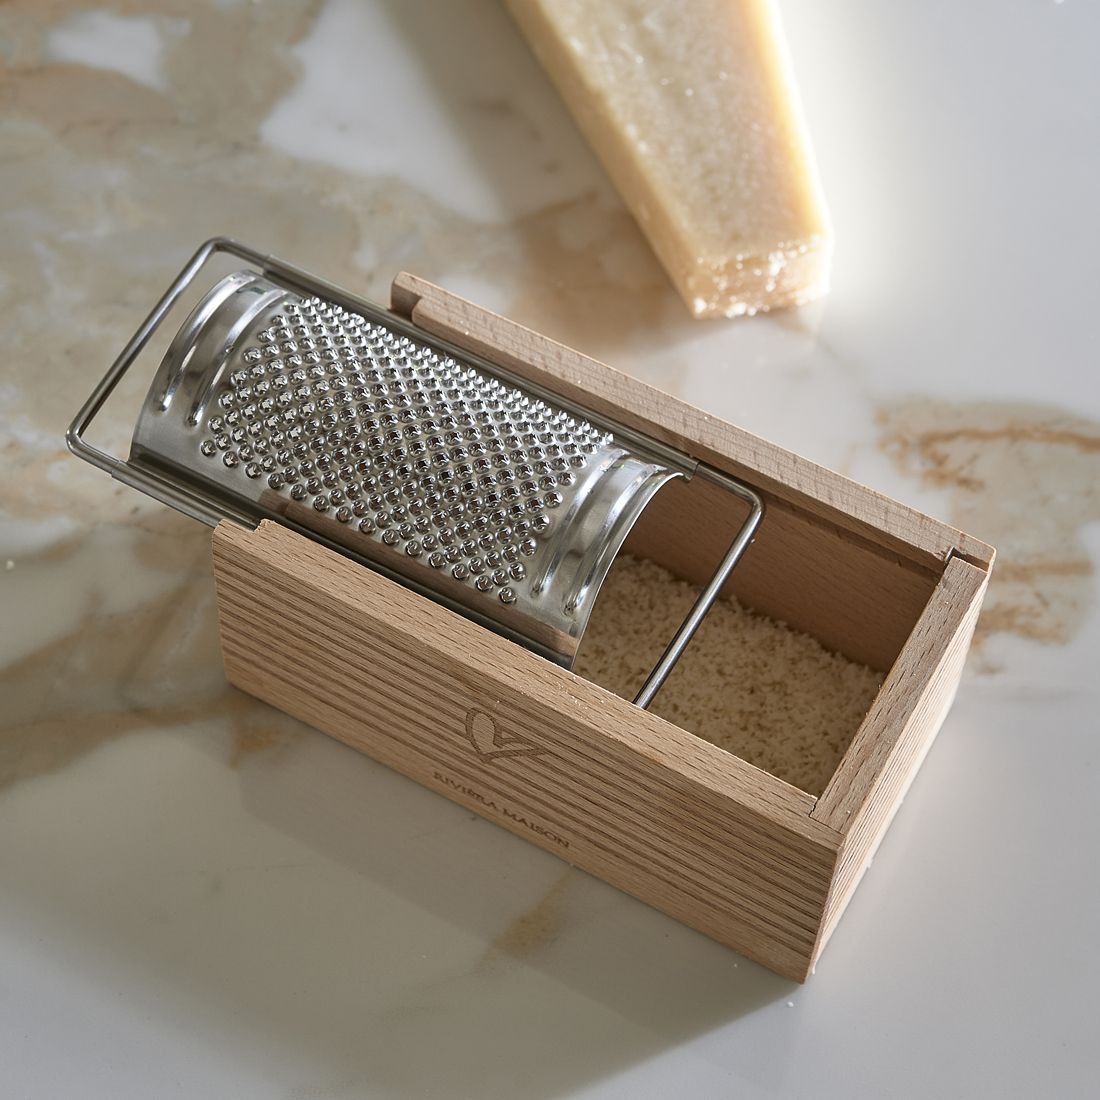 The Perfect Cheese Grater